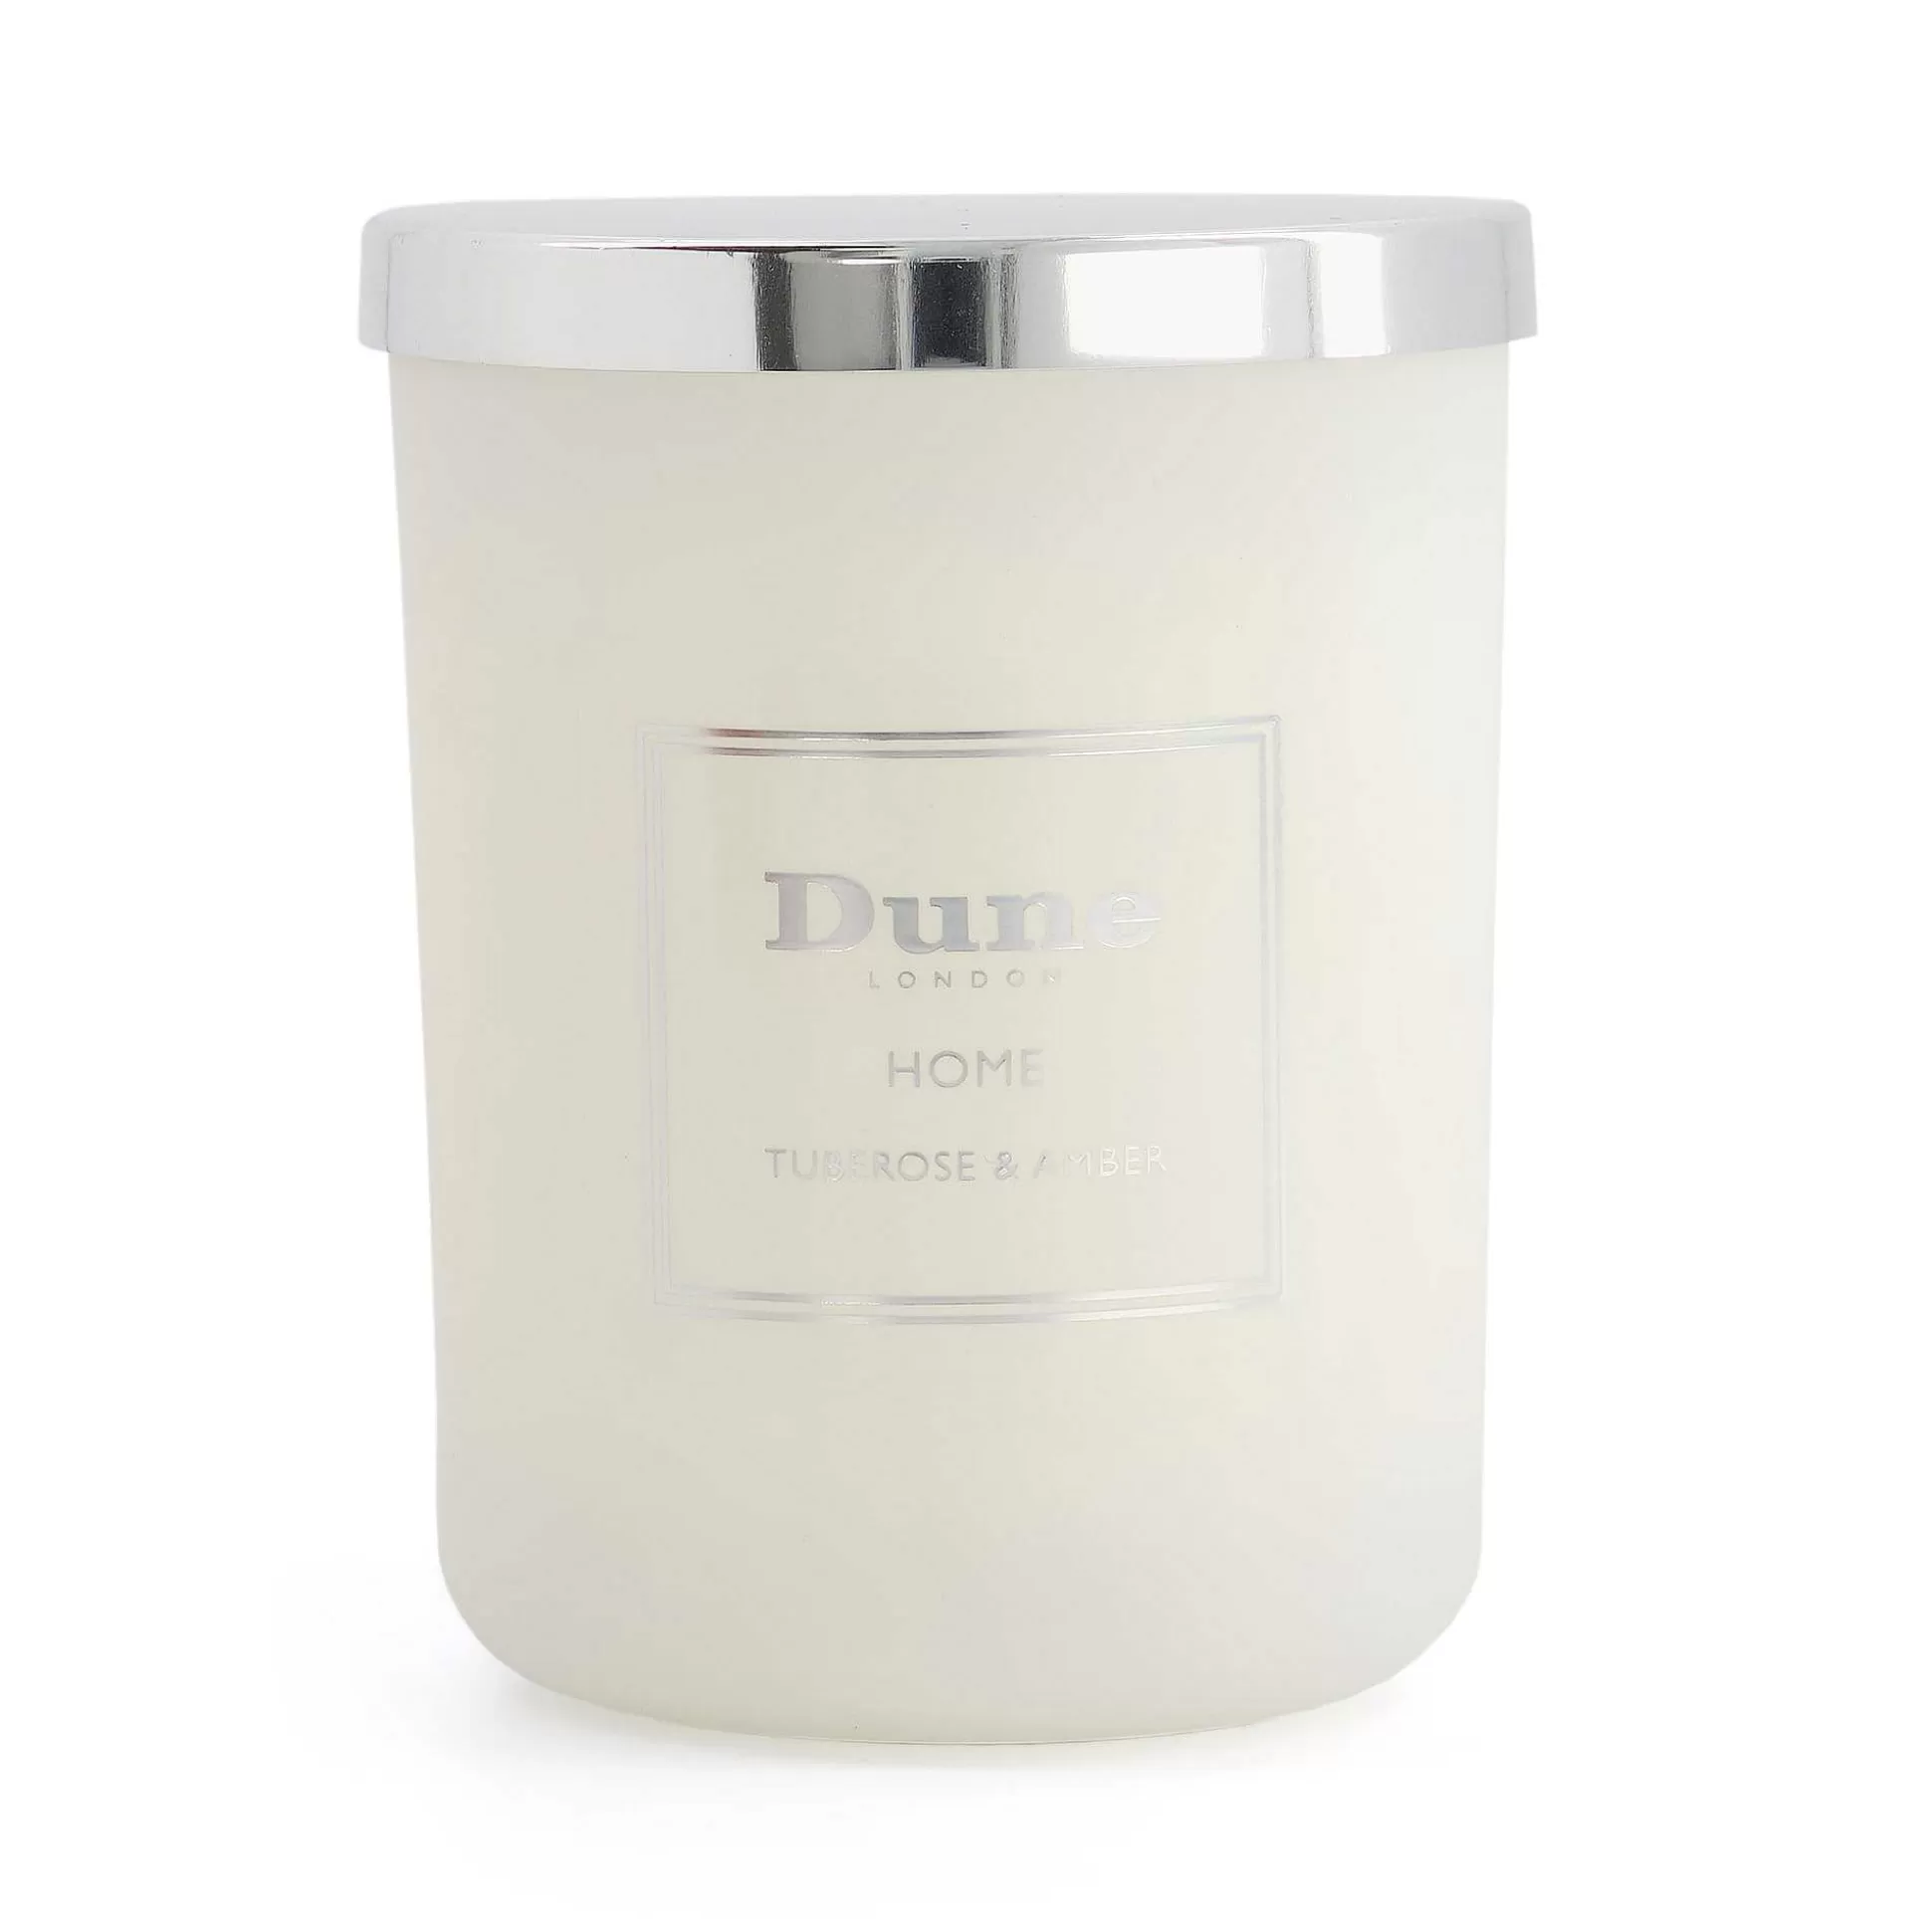 Dune London CANDLE2 - SILVER- Gifts | Accessories